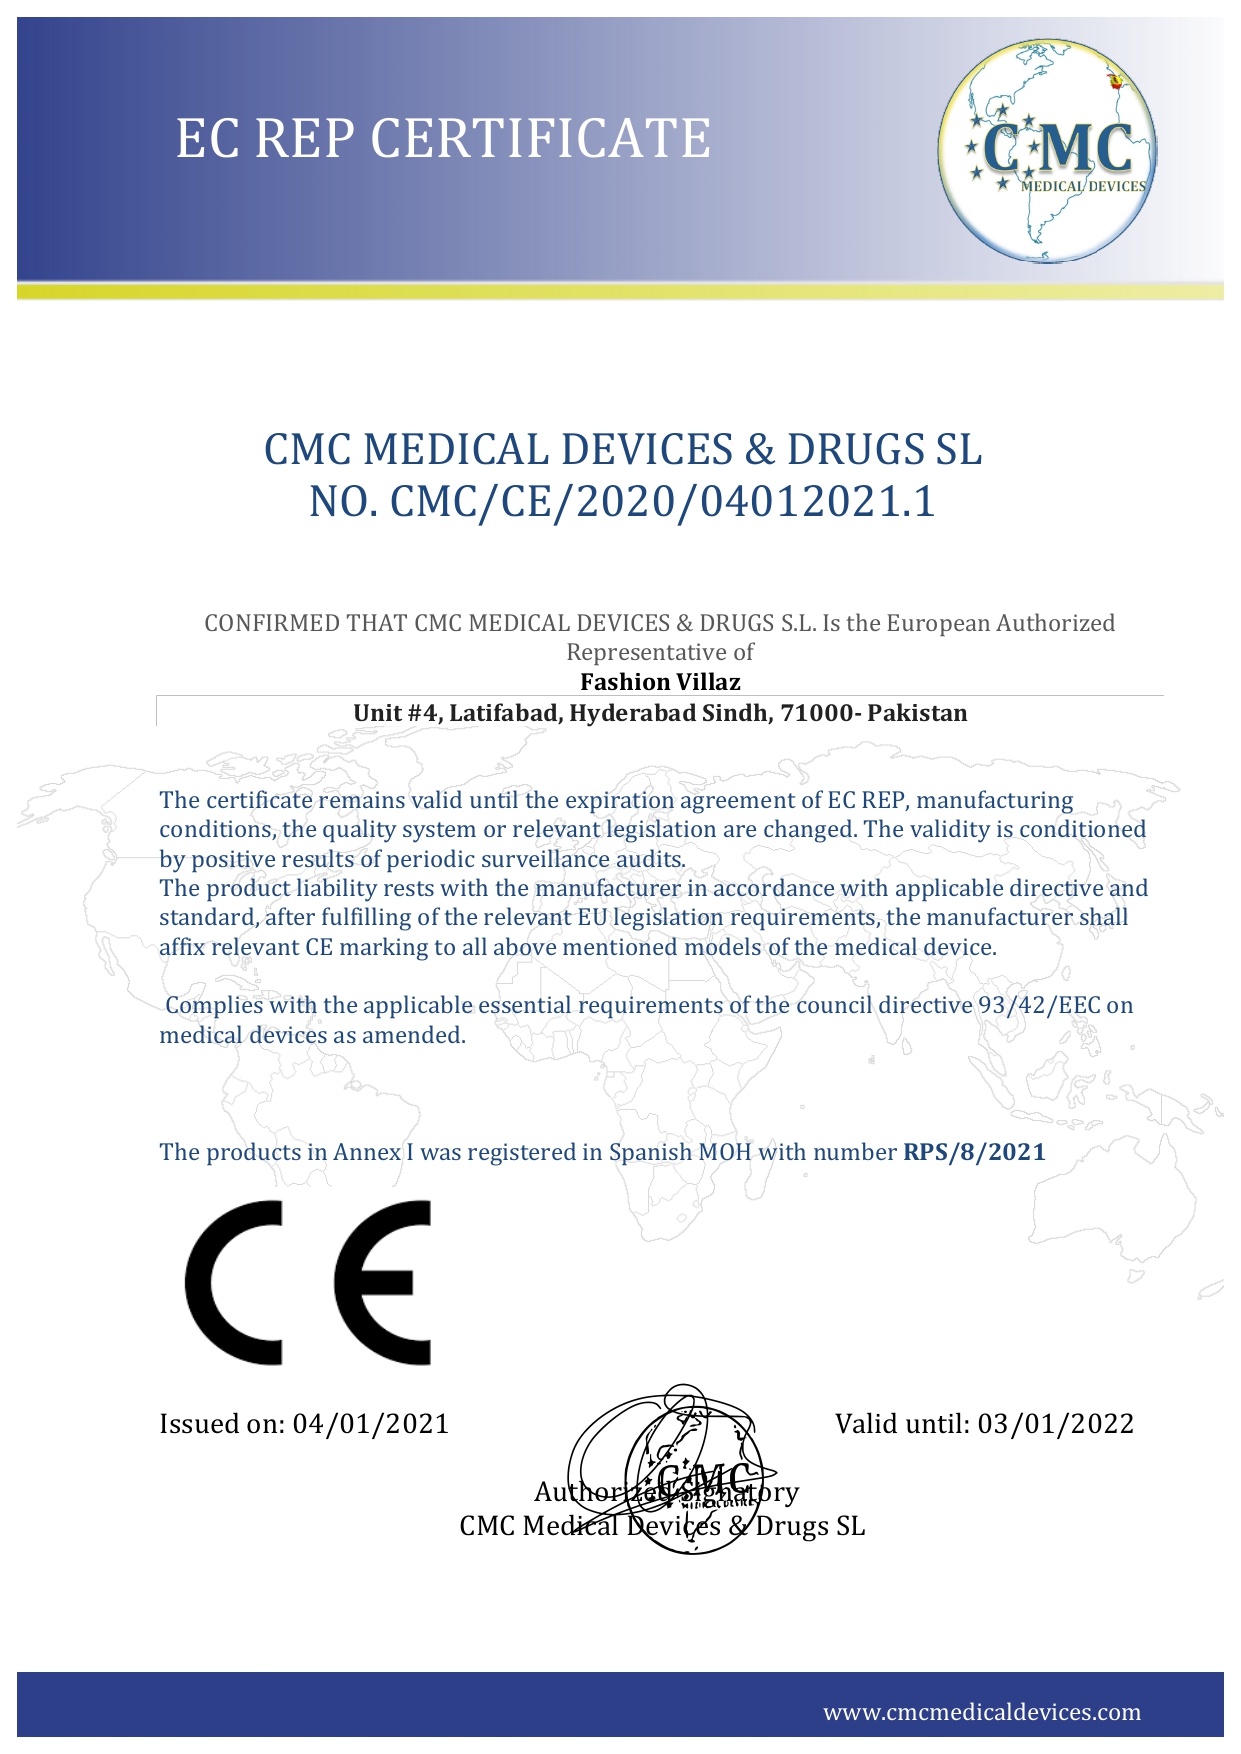 fvsurgical ISO 13485:2016 certification